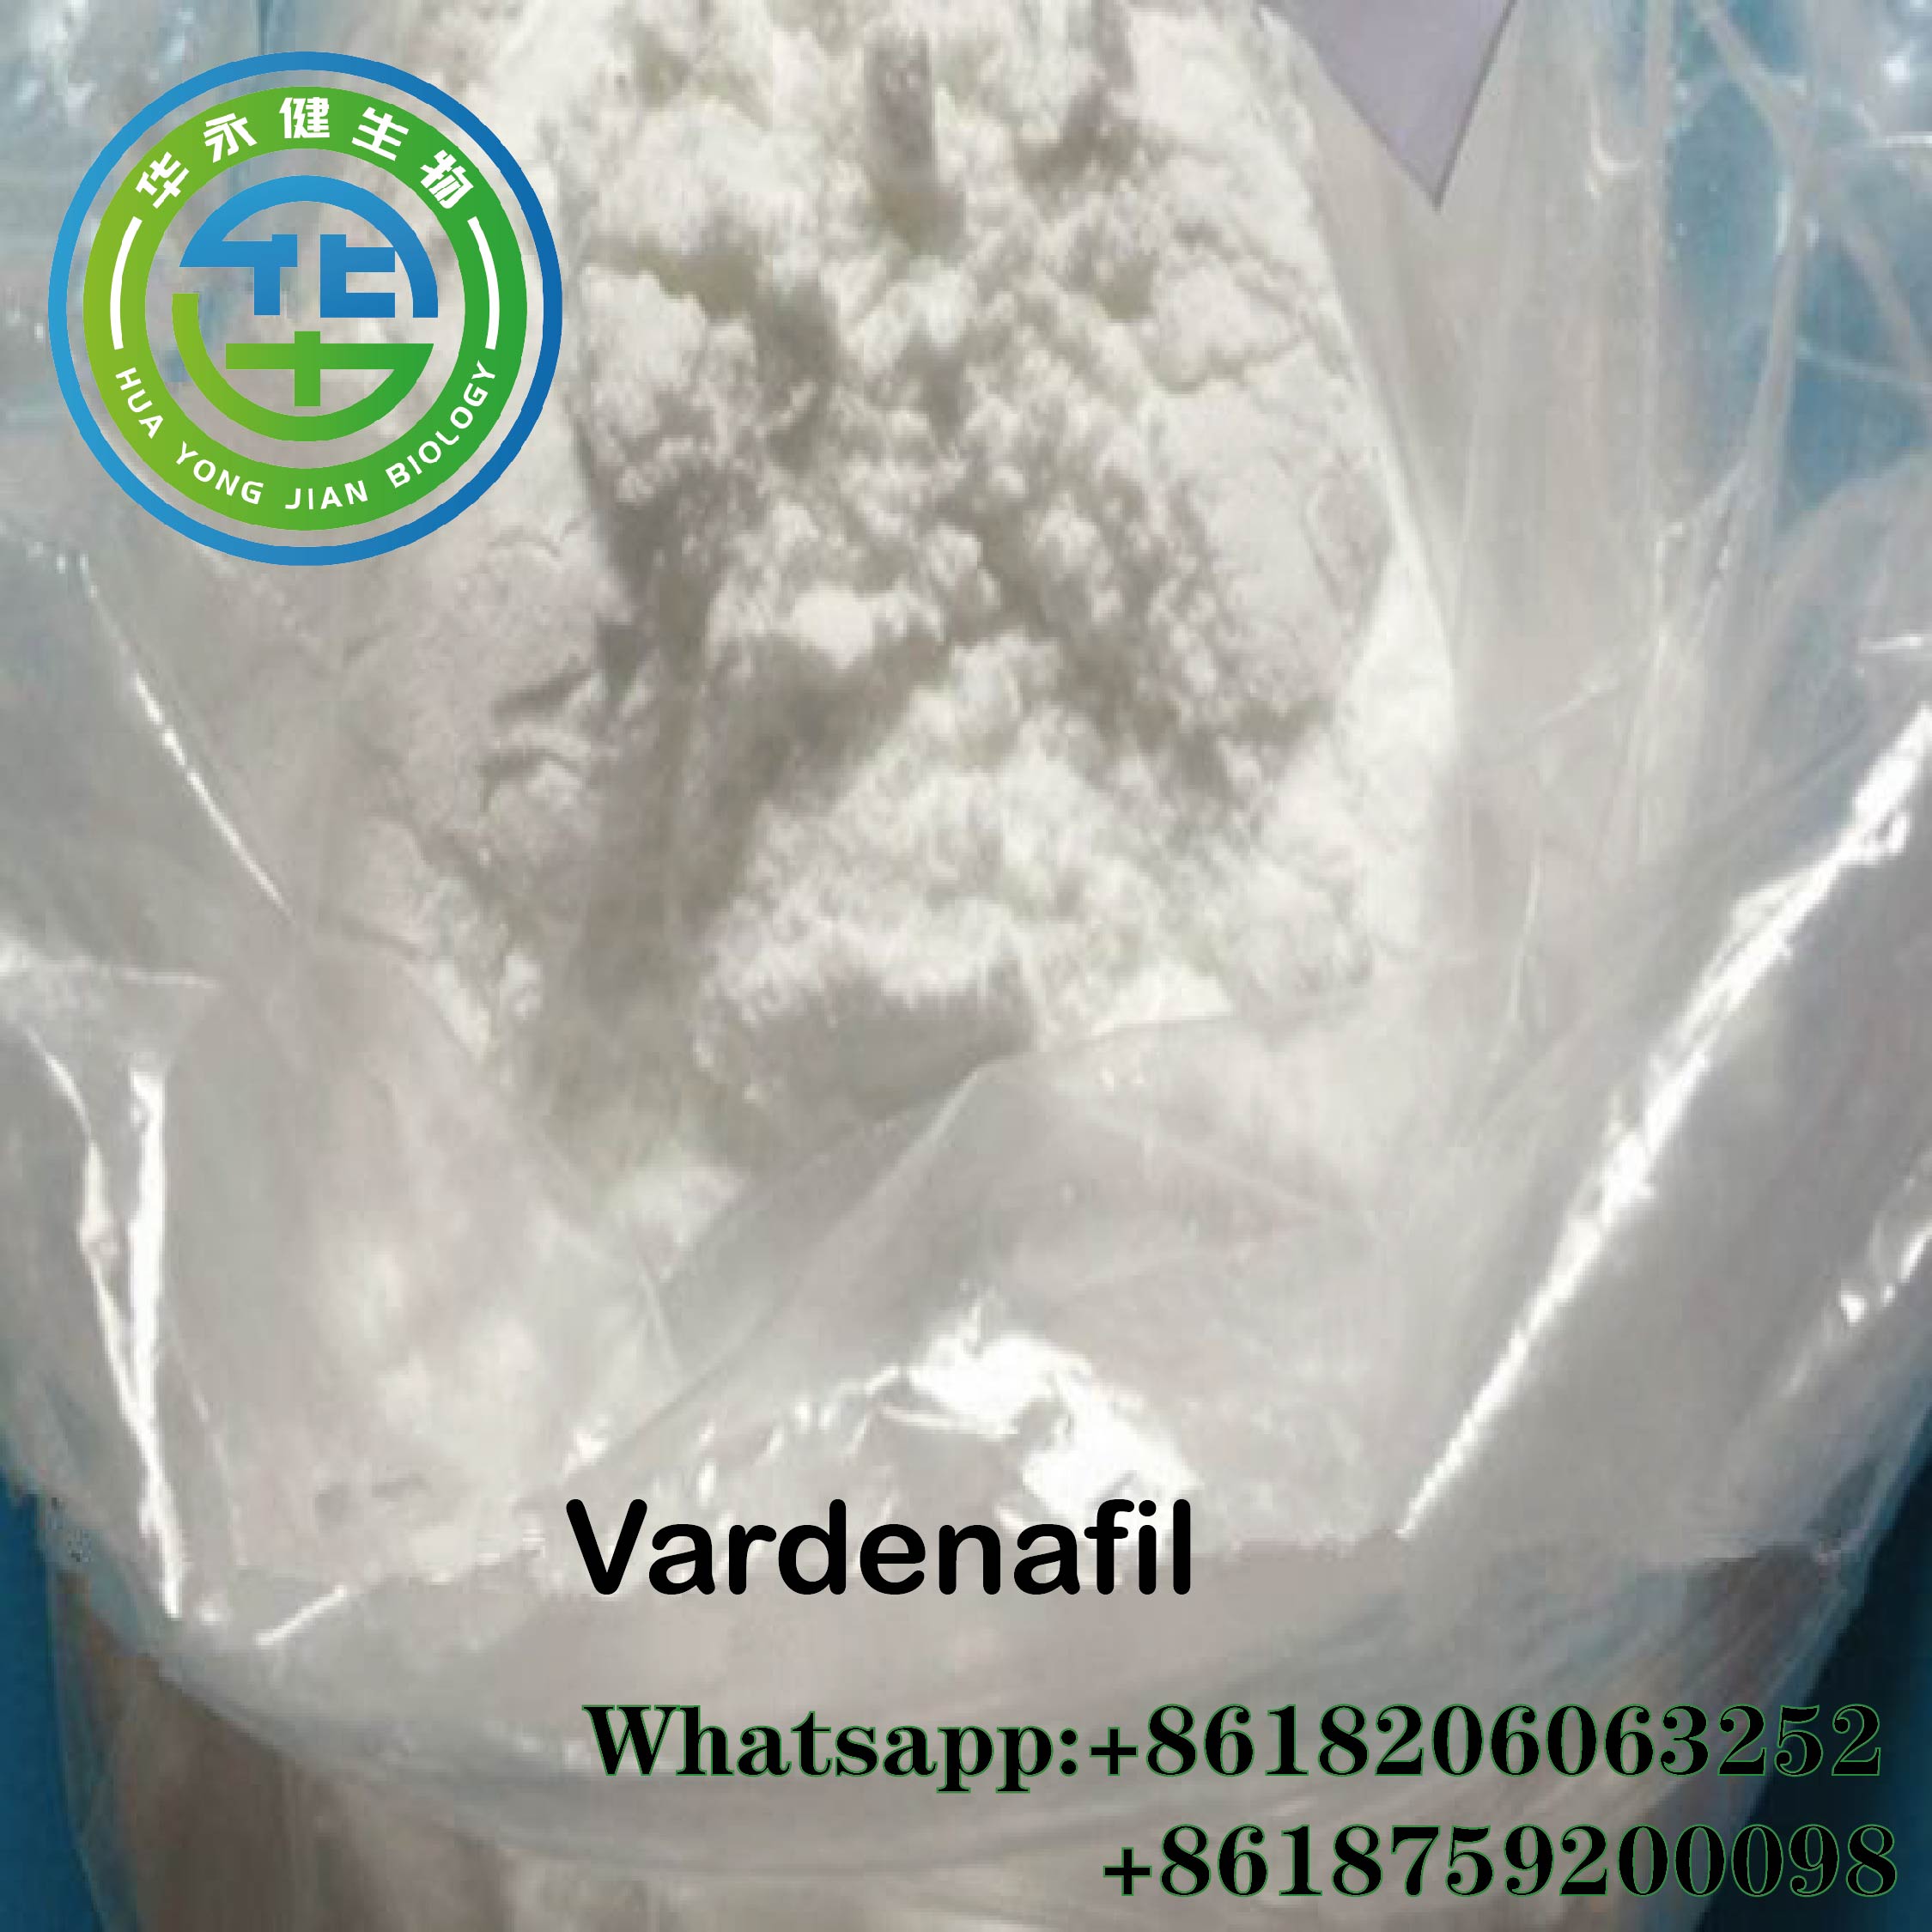 Vardenafil in order for an erection to be obtained or maintained.